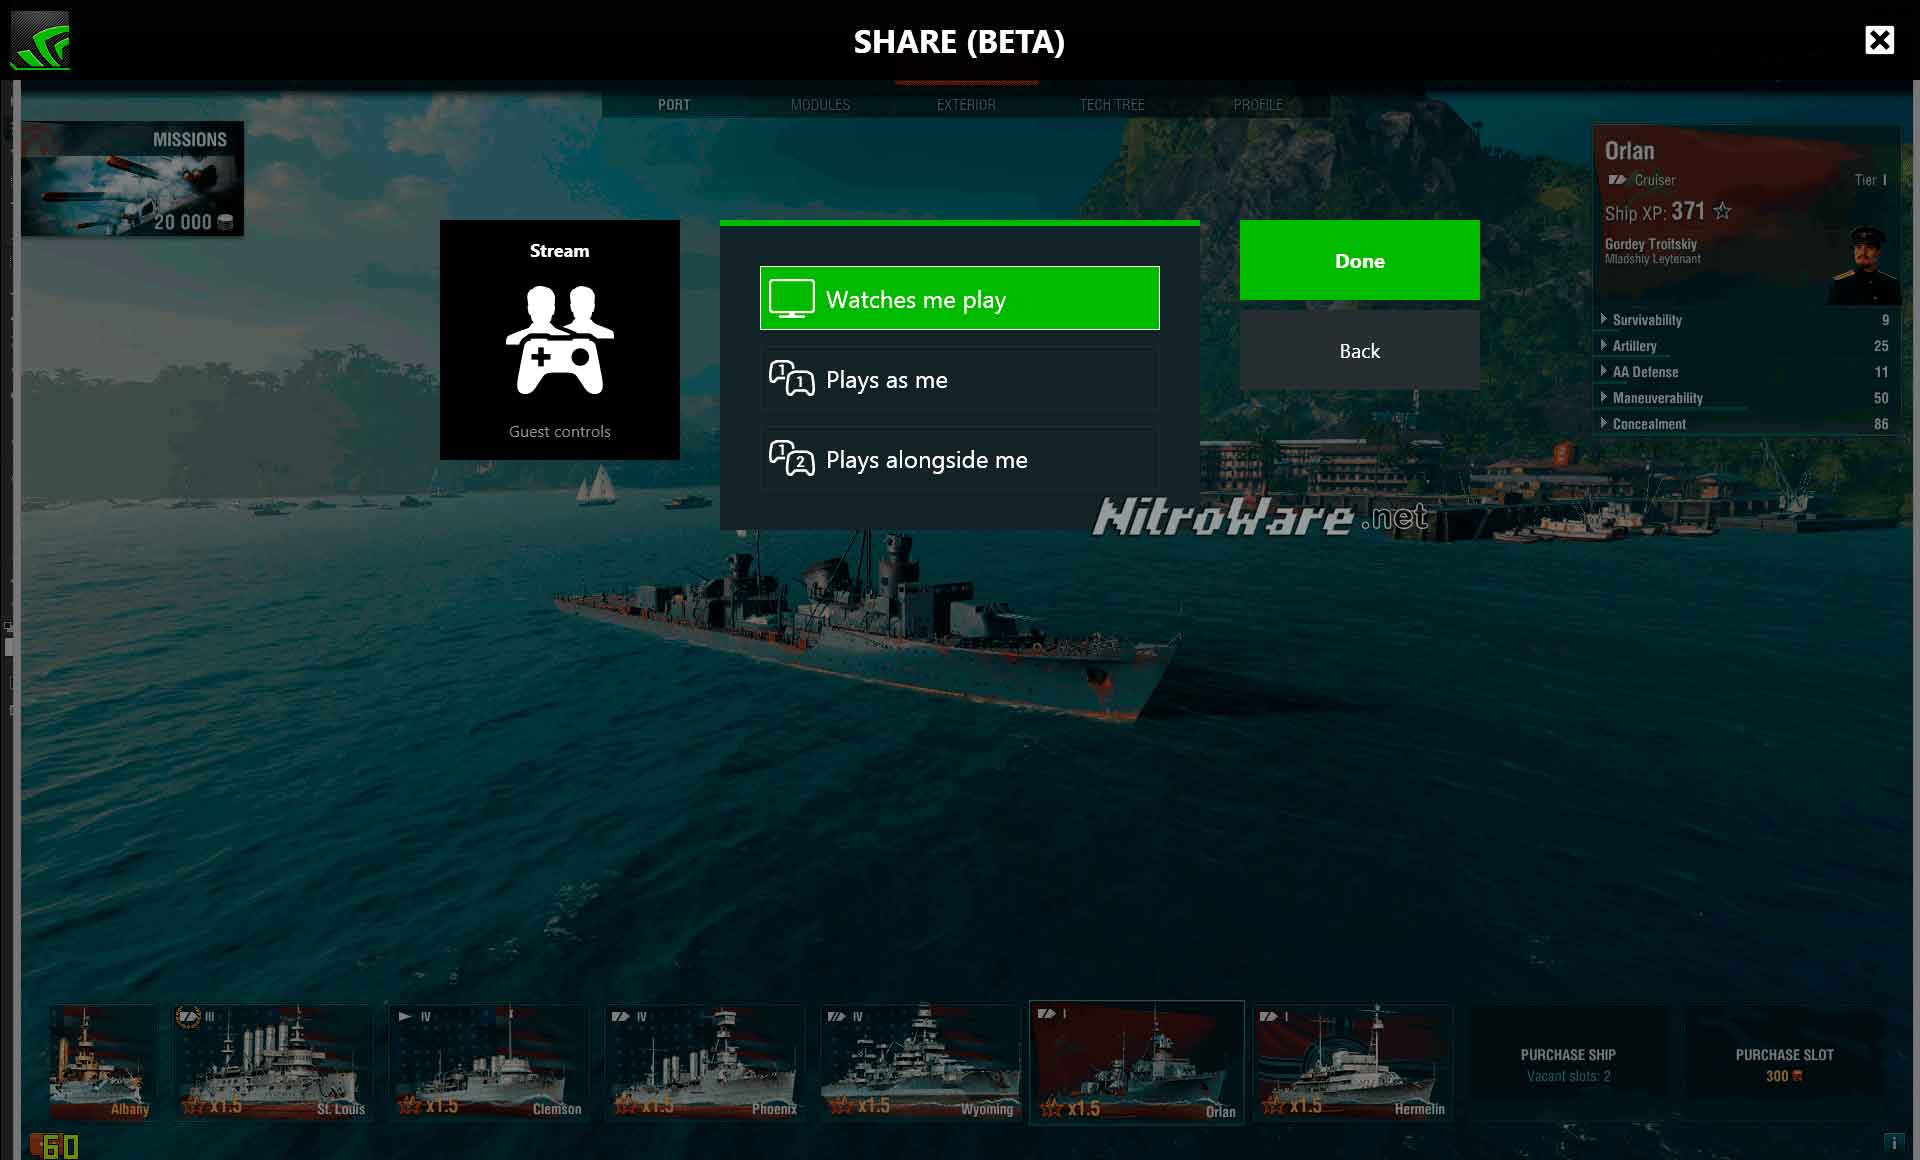 nvidia geforce experience share gamestream co-op